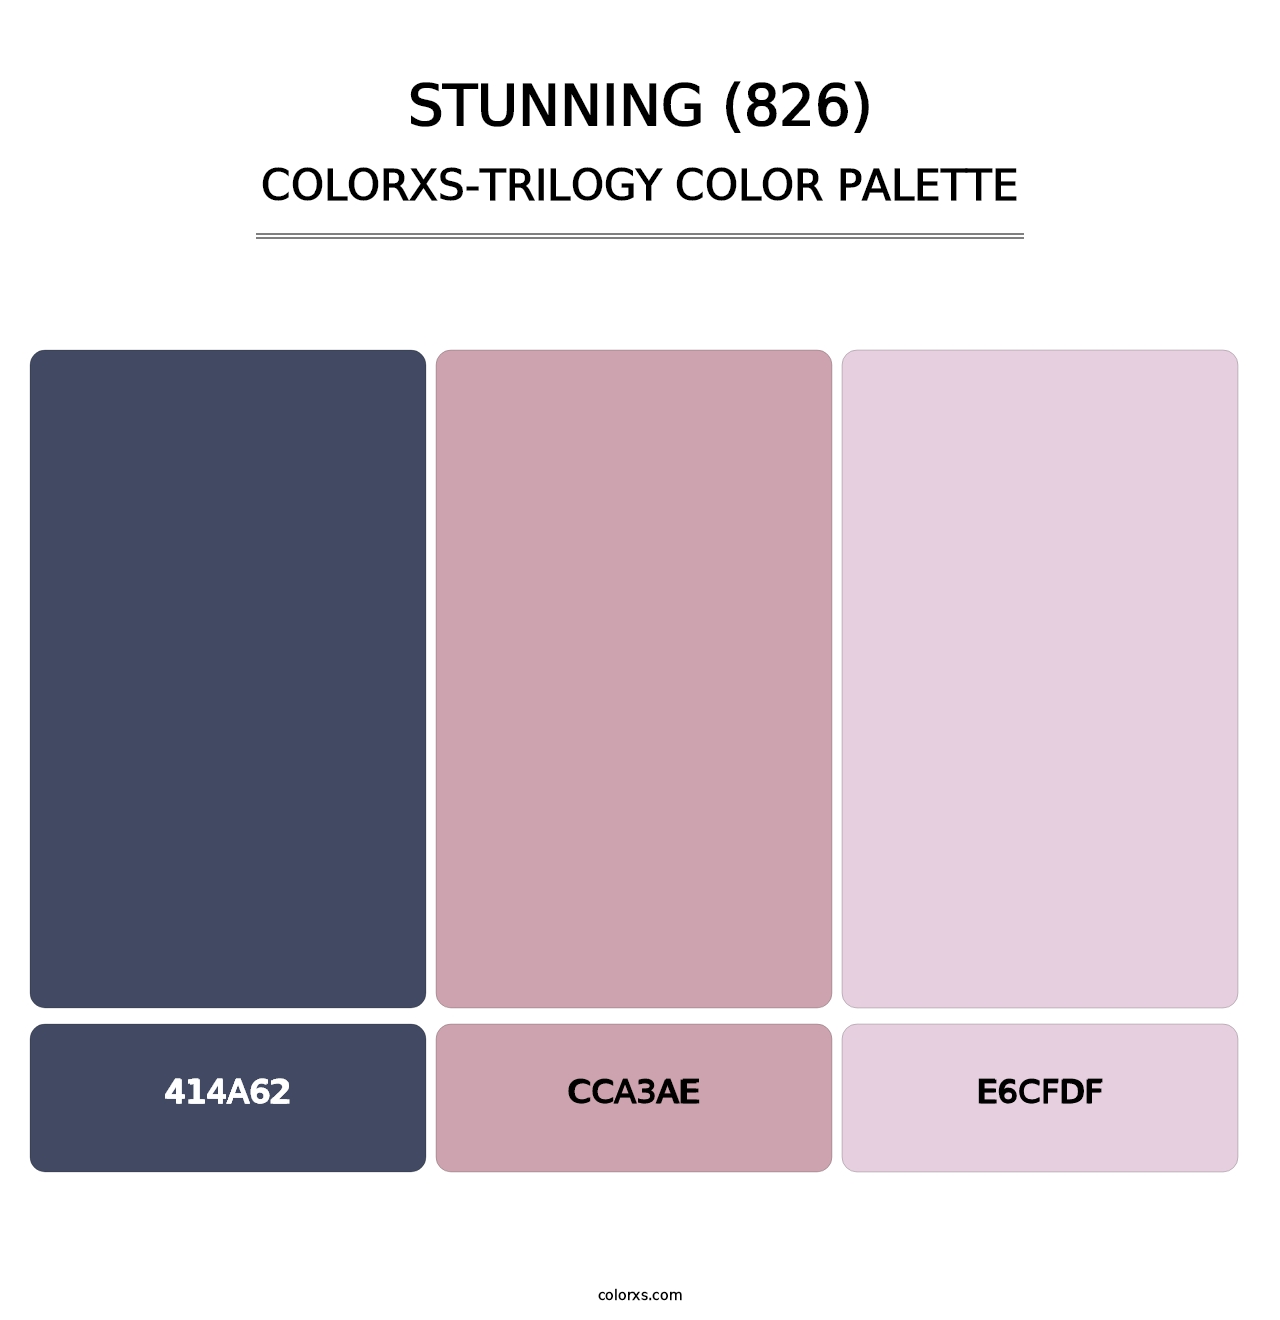 Stunning (826) - Colorxs Trilogy Palette